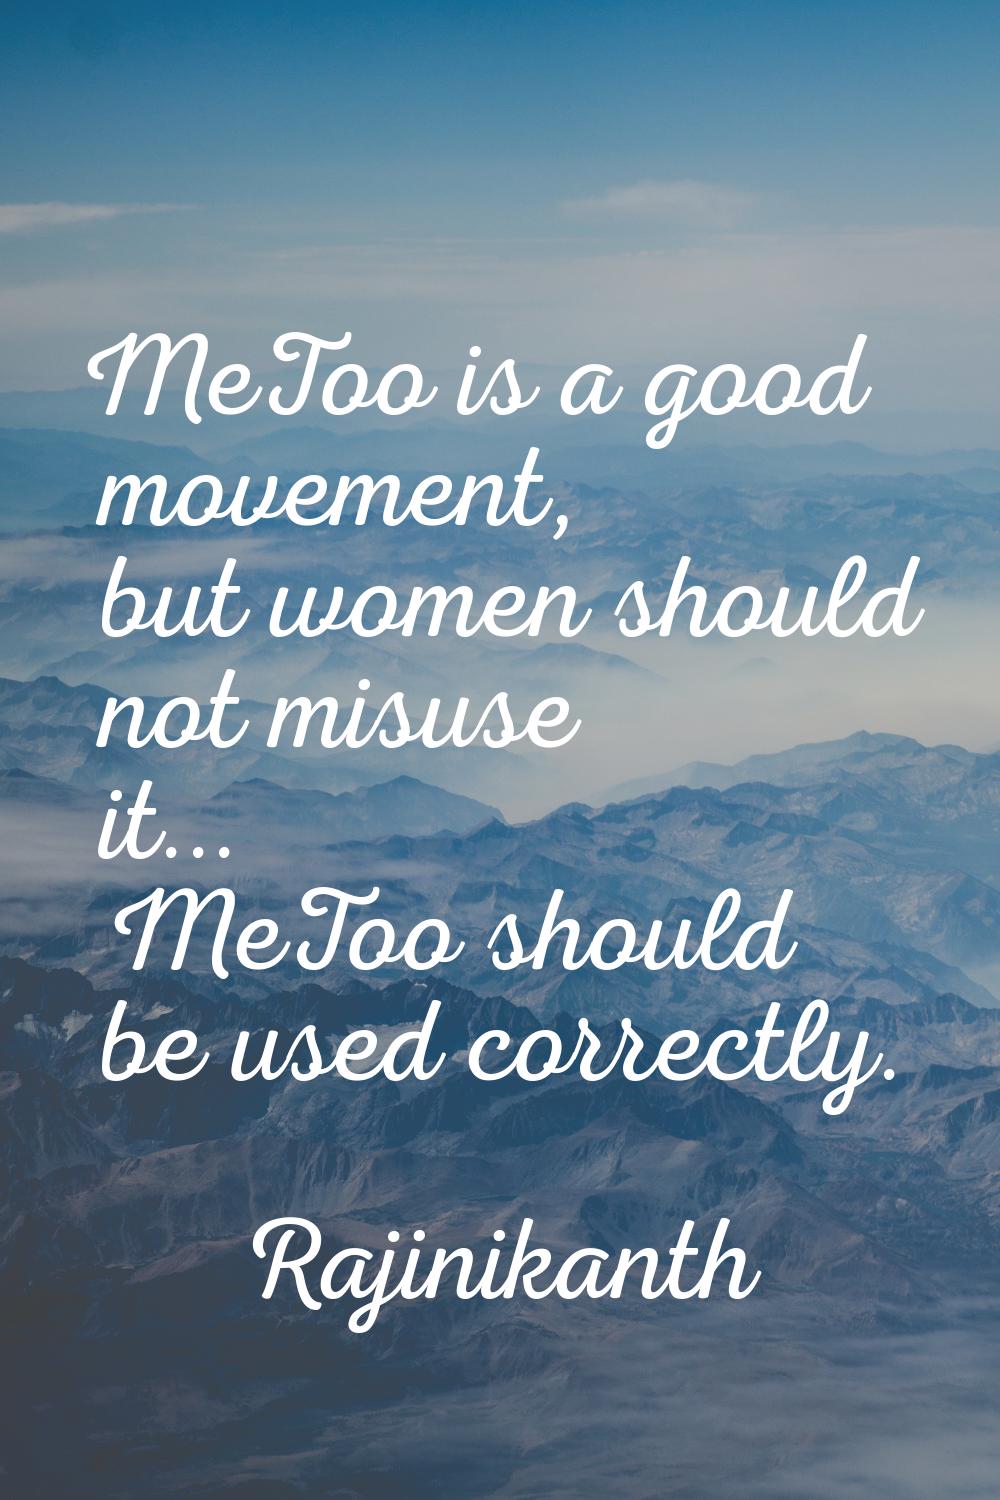 MeToo is a good movement, but women should not misuse it... MeToo should be used correctly.